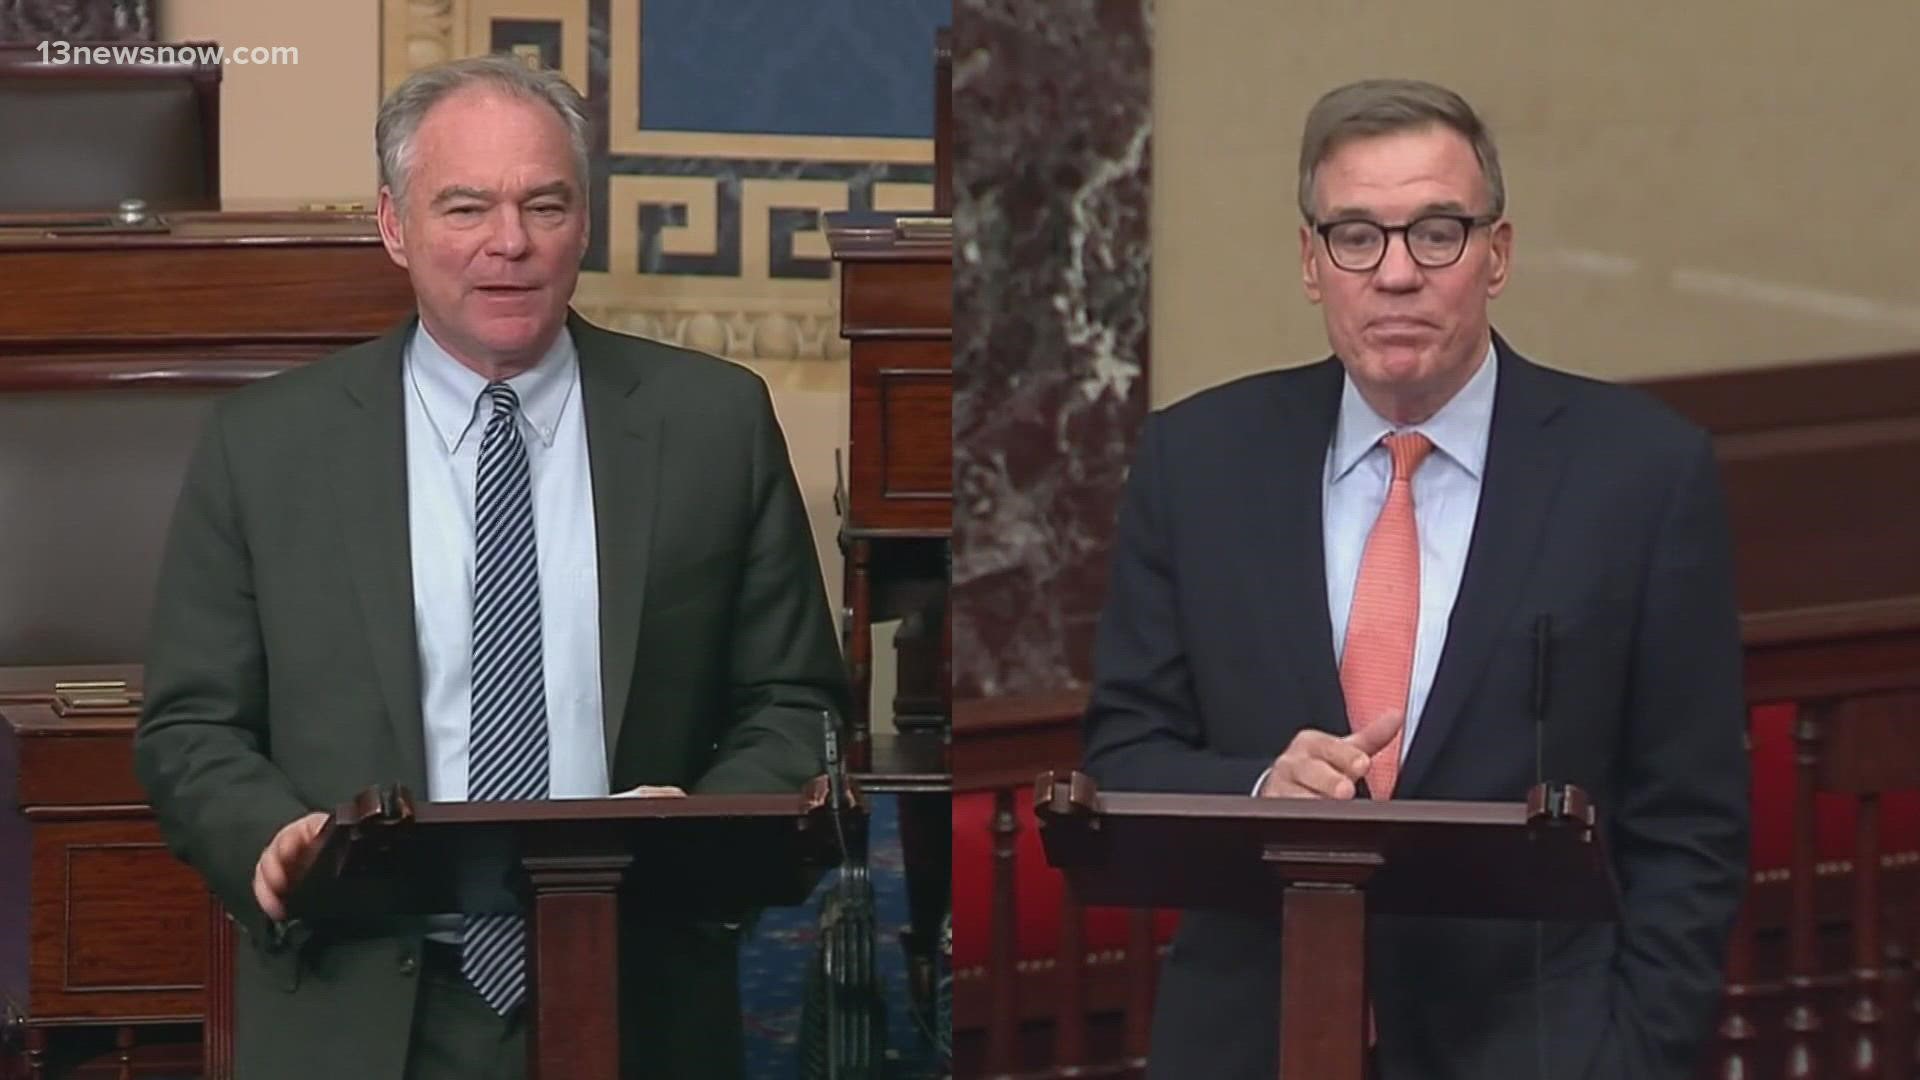 Democratic Sens. Warner and Kaine said they would be concerned if women didn't have a safe place for abortions. The Republican party pledged to defend human life.